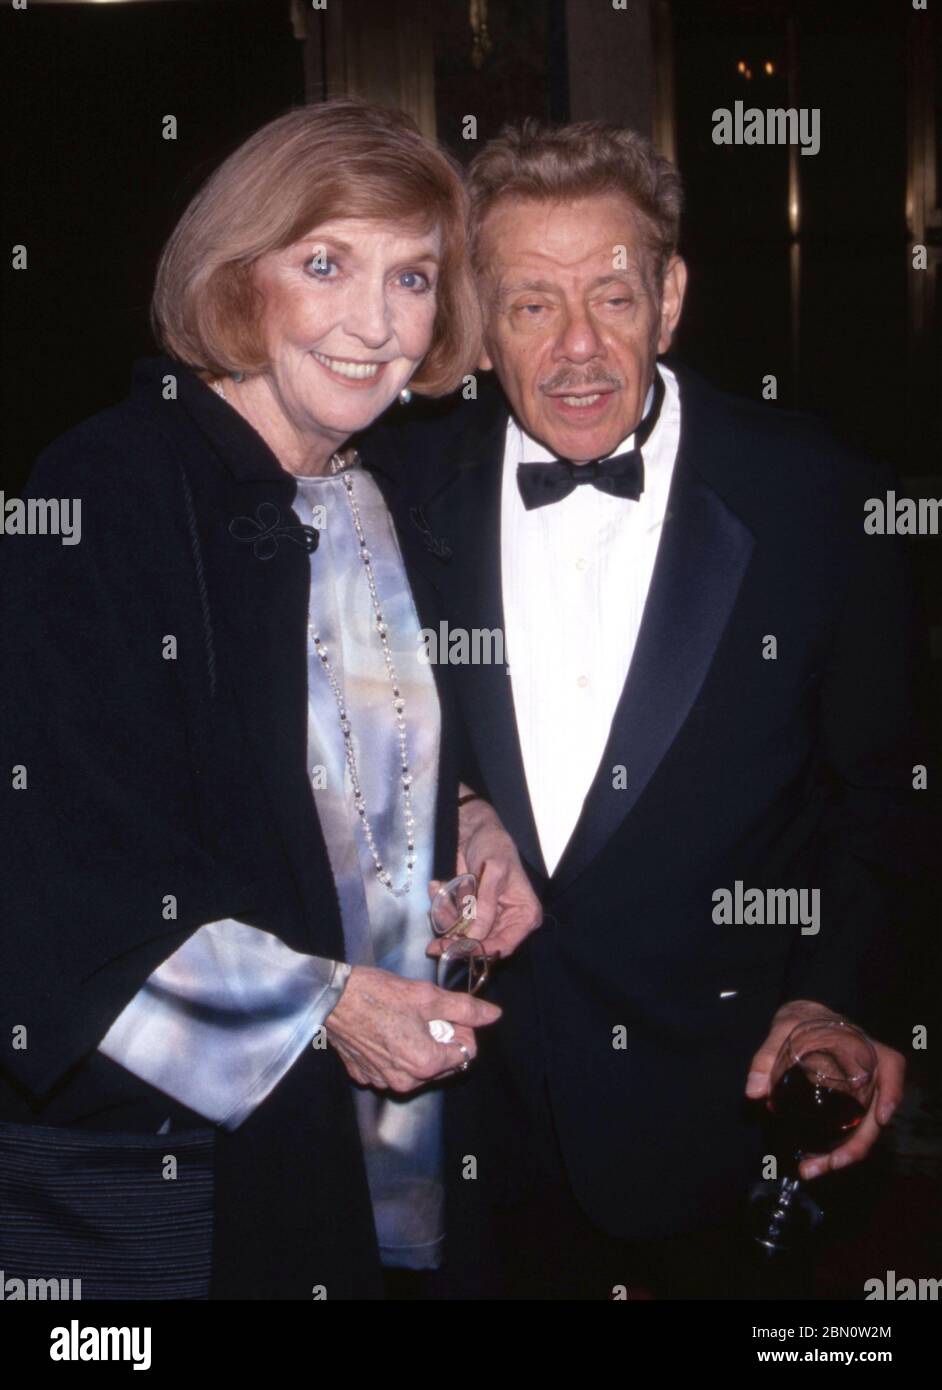 FILE: 12th May 2020. Photo taken: 11 May 2020 - Comedy veteran Jerry Stiller has died at the age of 92. Jerry Stiller was known for his role as Frank Costanza in the show 'Seinfeld' and later, as Arthur Spooner in the sitcom, 'The King of Queens.' Stiller had lost his wife, Anne Meara, in 2015. File photo:FILE PHOTO: Anne Meara and Jerry Stiller attend 'A Broadway Frolic' A benefit for the National Actors Theater at the Plaza Hotel on 10/19/1998 in New York City. Photo Credit: McBride/face to face/AdMedia /MediaPunch Credit: MediaPunch Inc/Alamy Live News Stock Photo